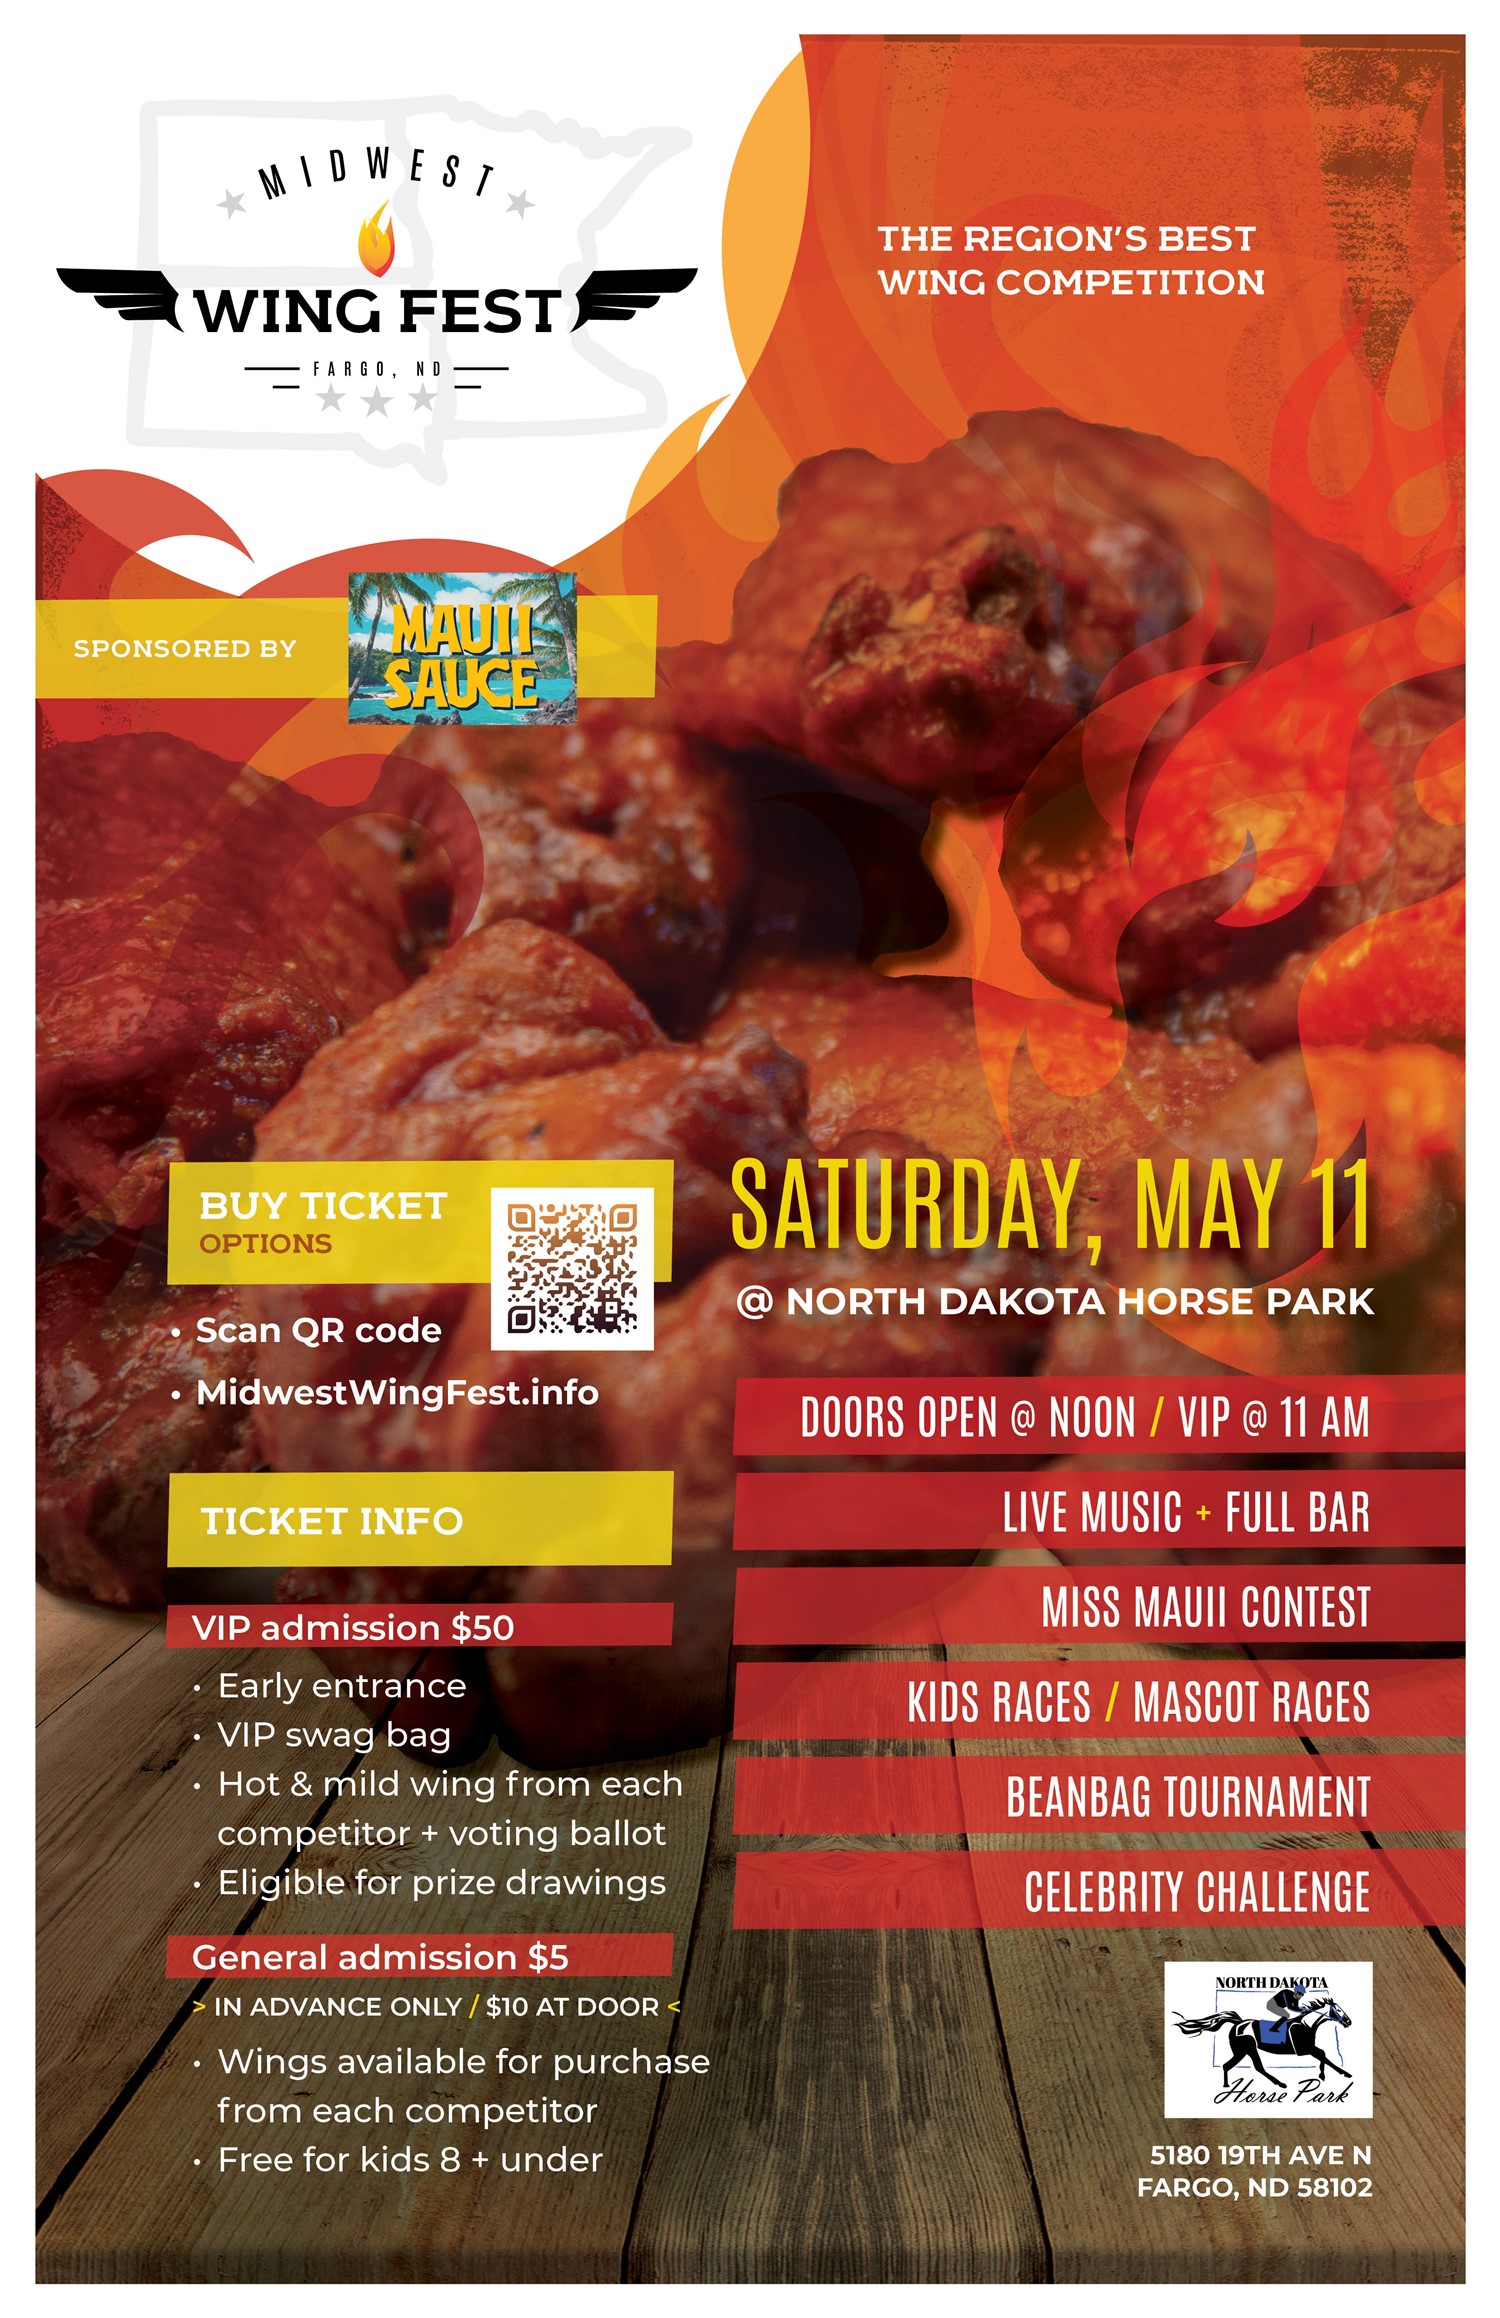 Midwest Wing Fest The region's best wing competition on May 11, 12:00@North Dakota Horse Park - Buy tickets and Get information on Sidestreet Live / Four and Four 